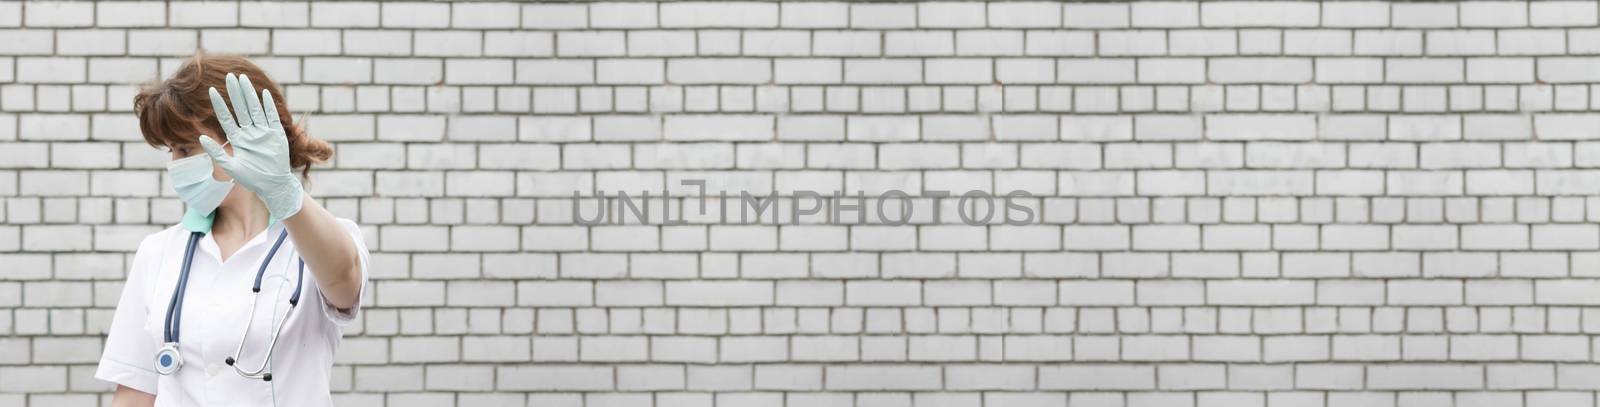 Doctor concept. Close your face with your hands. Medical error. Girl in white medical dressing gown on brick wall background. Photo for your design. Horizontal sheet orientation